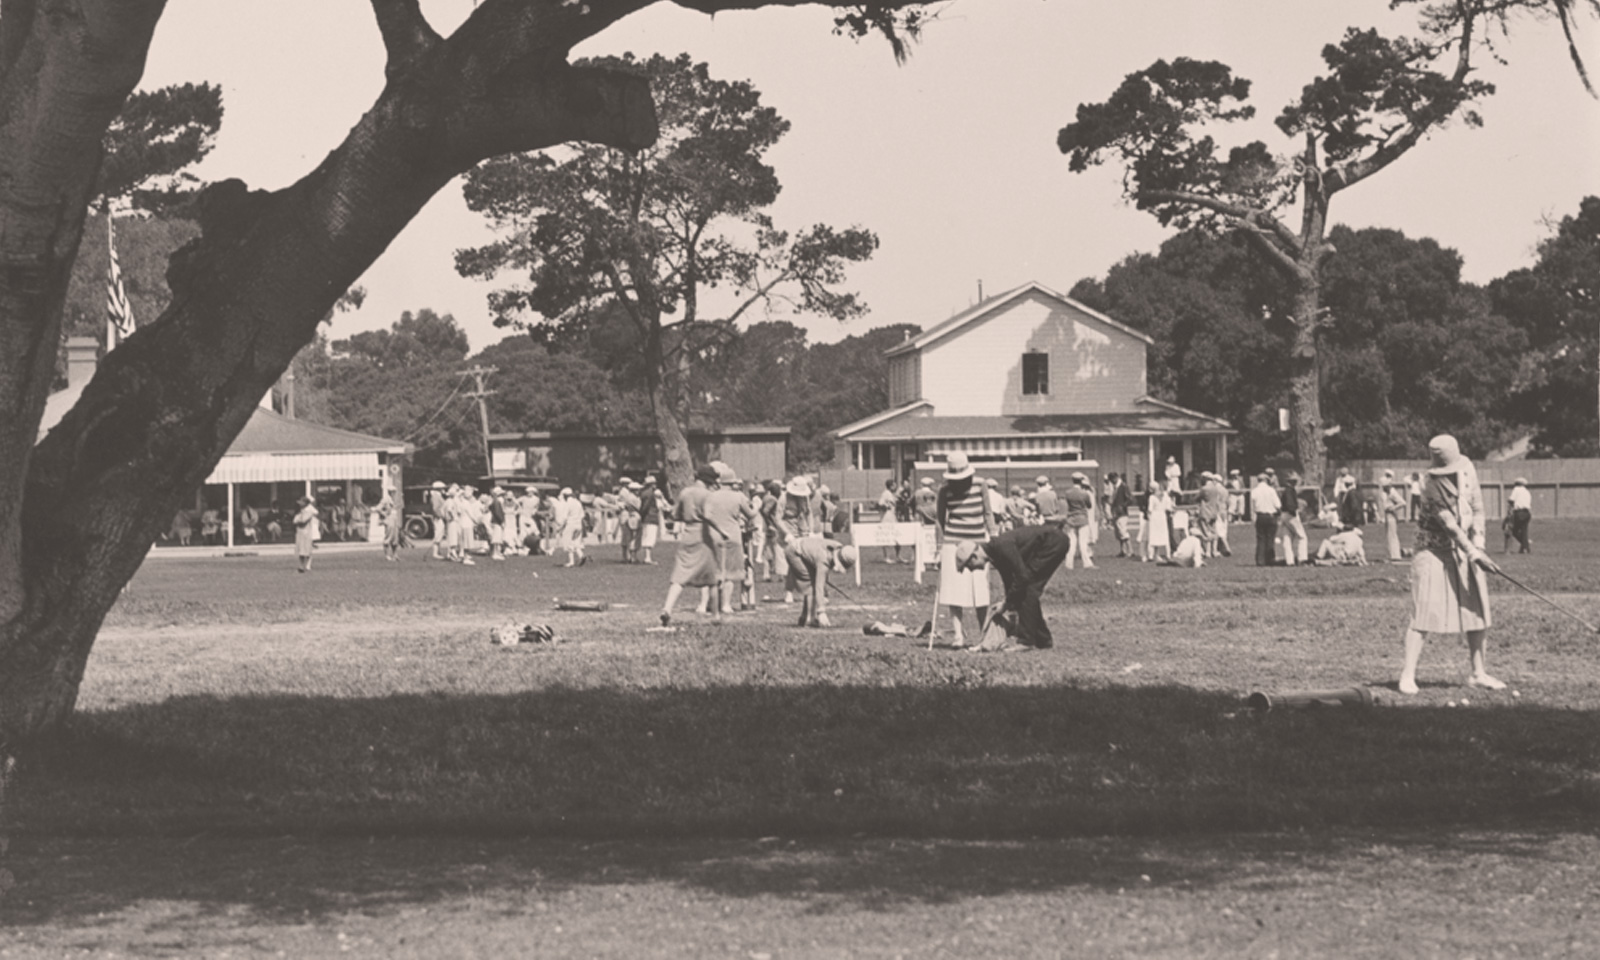 In September 1931, as the men moved to championship matches on Pebble Beach Golf Links, the women took over the first tee and clubhouse of Del Monte Golf Course for the 23rd Annual Del Monte Championship.